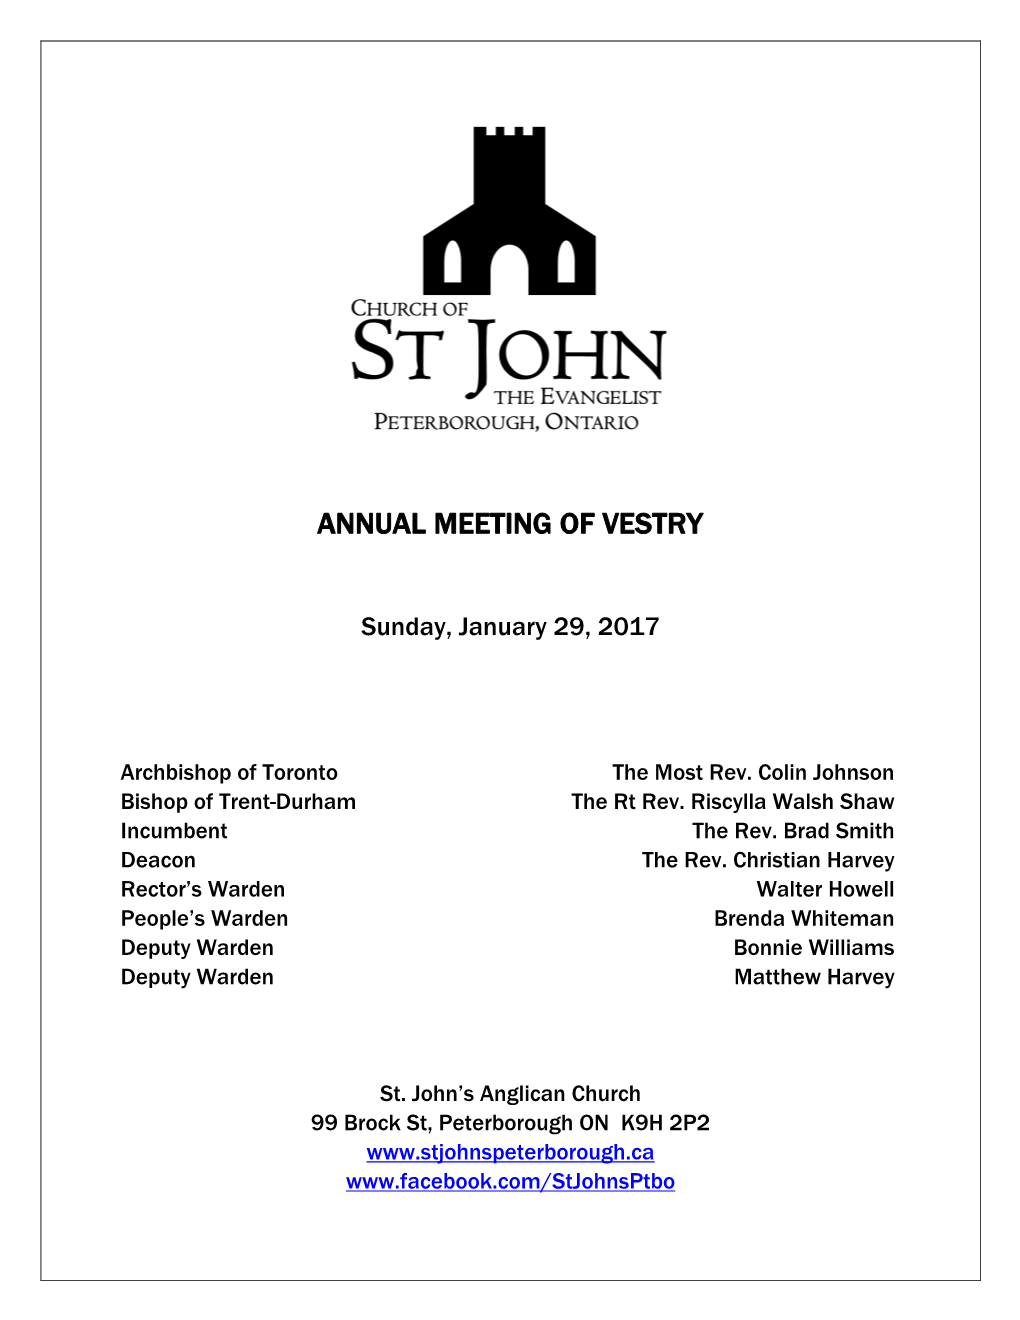 St John=S Parish Archives, Annual Report for 2008